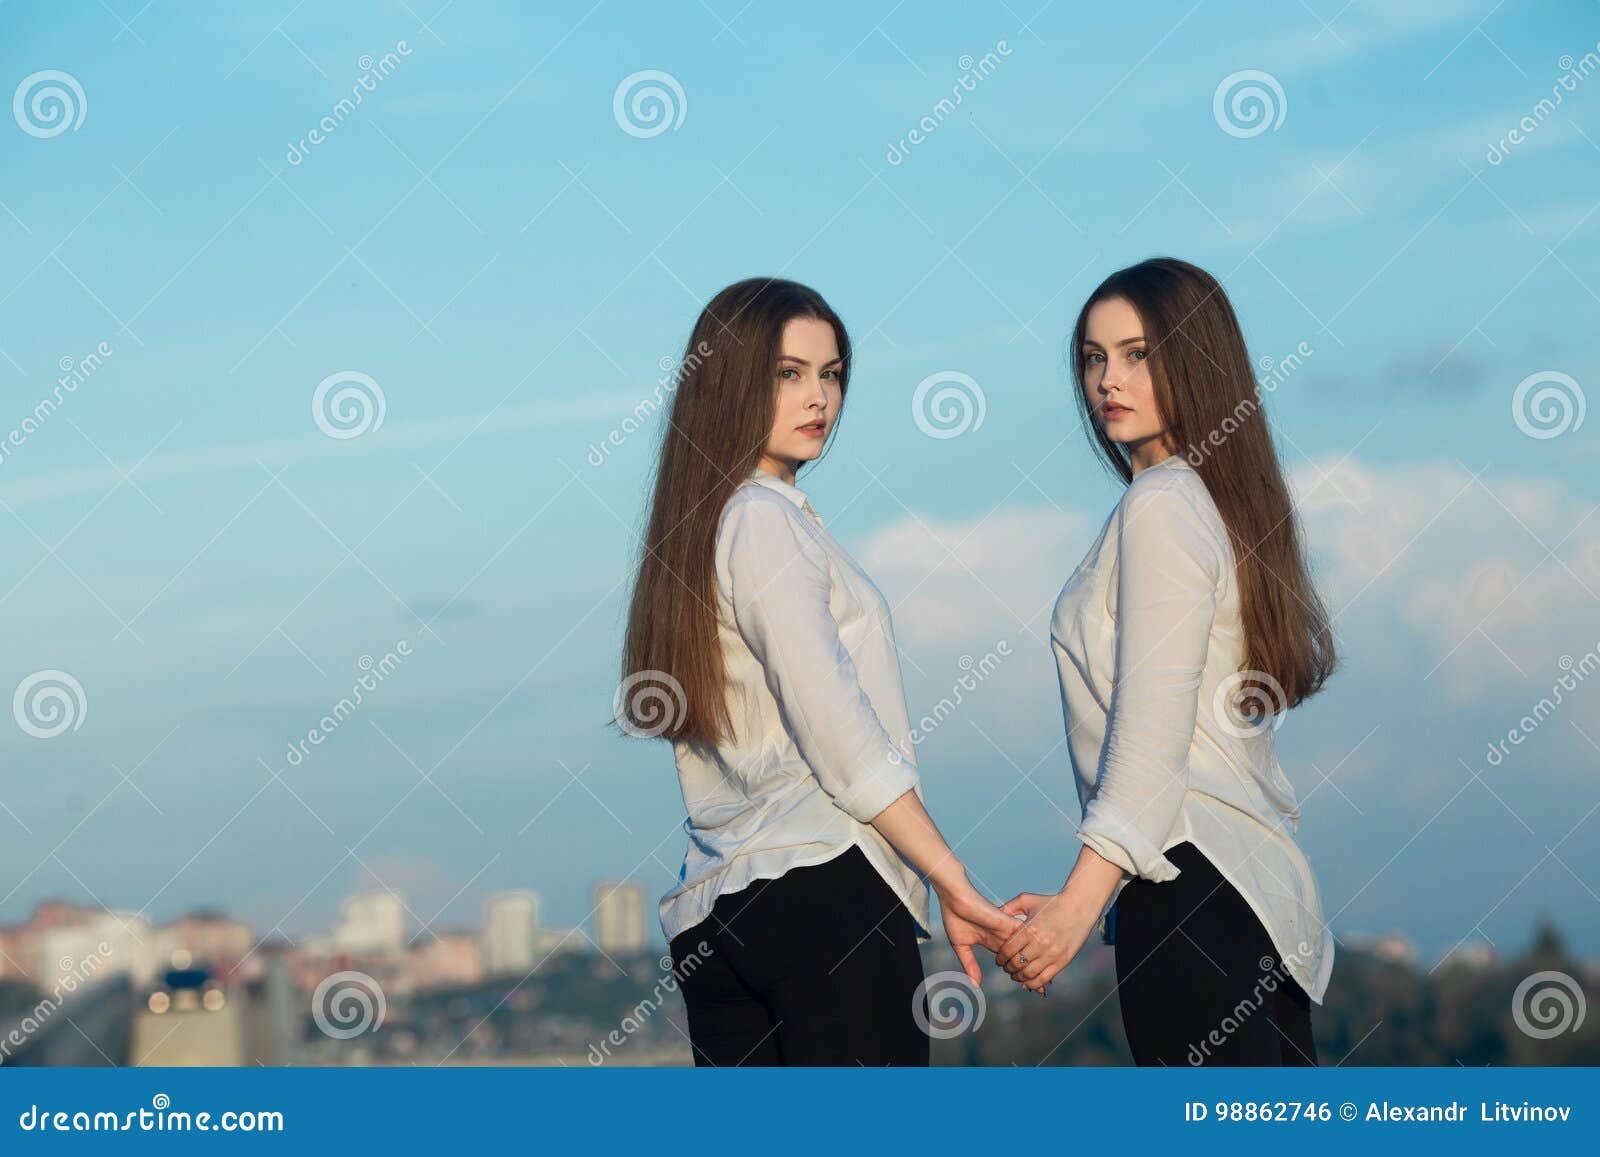 Young Teen Twin Sisters